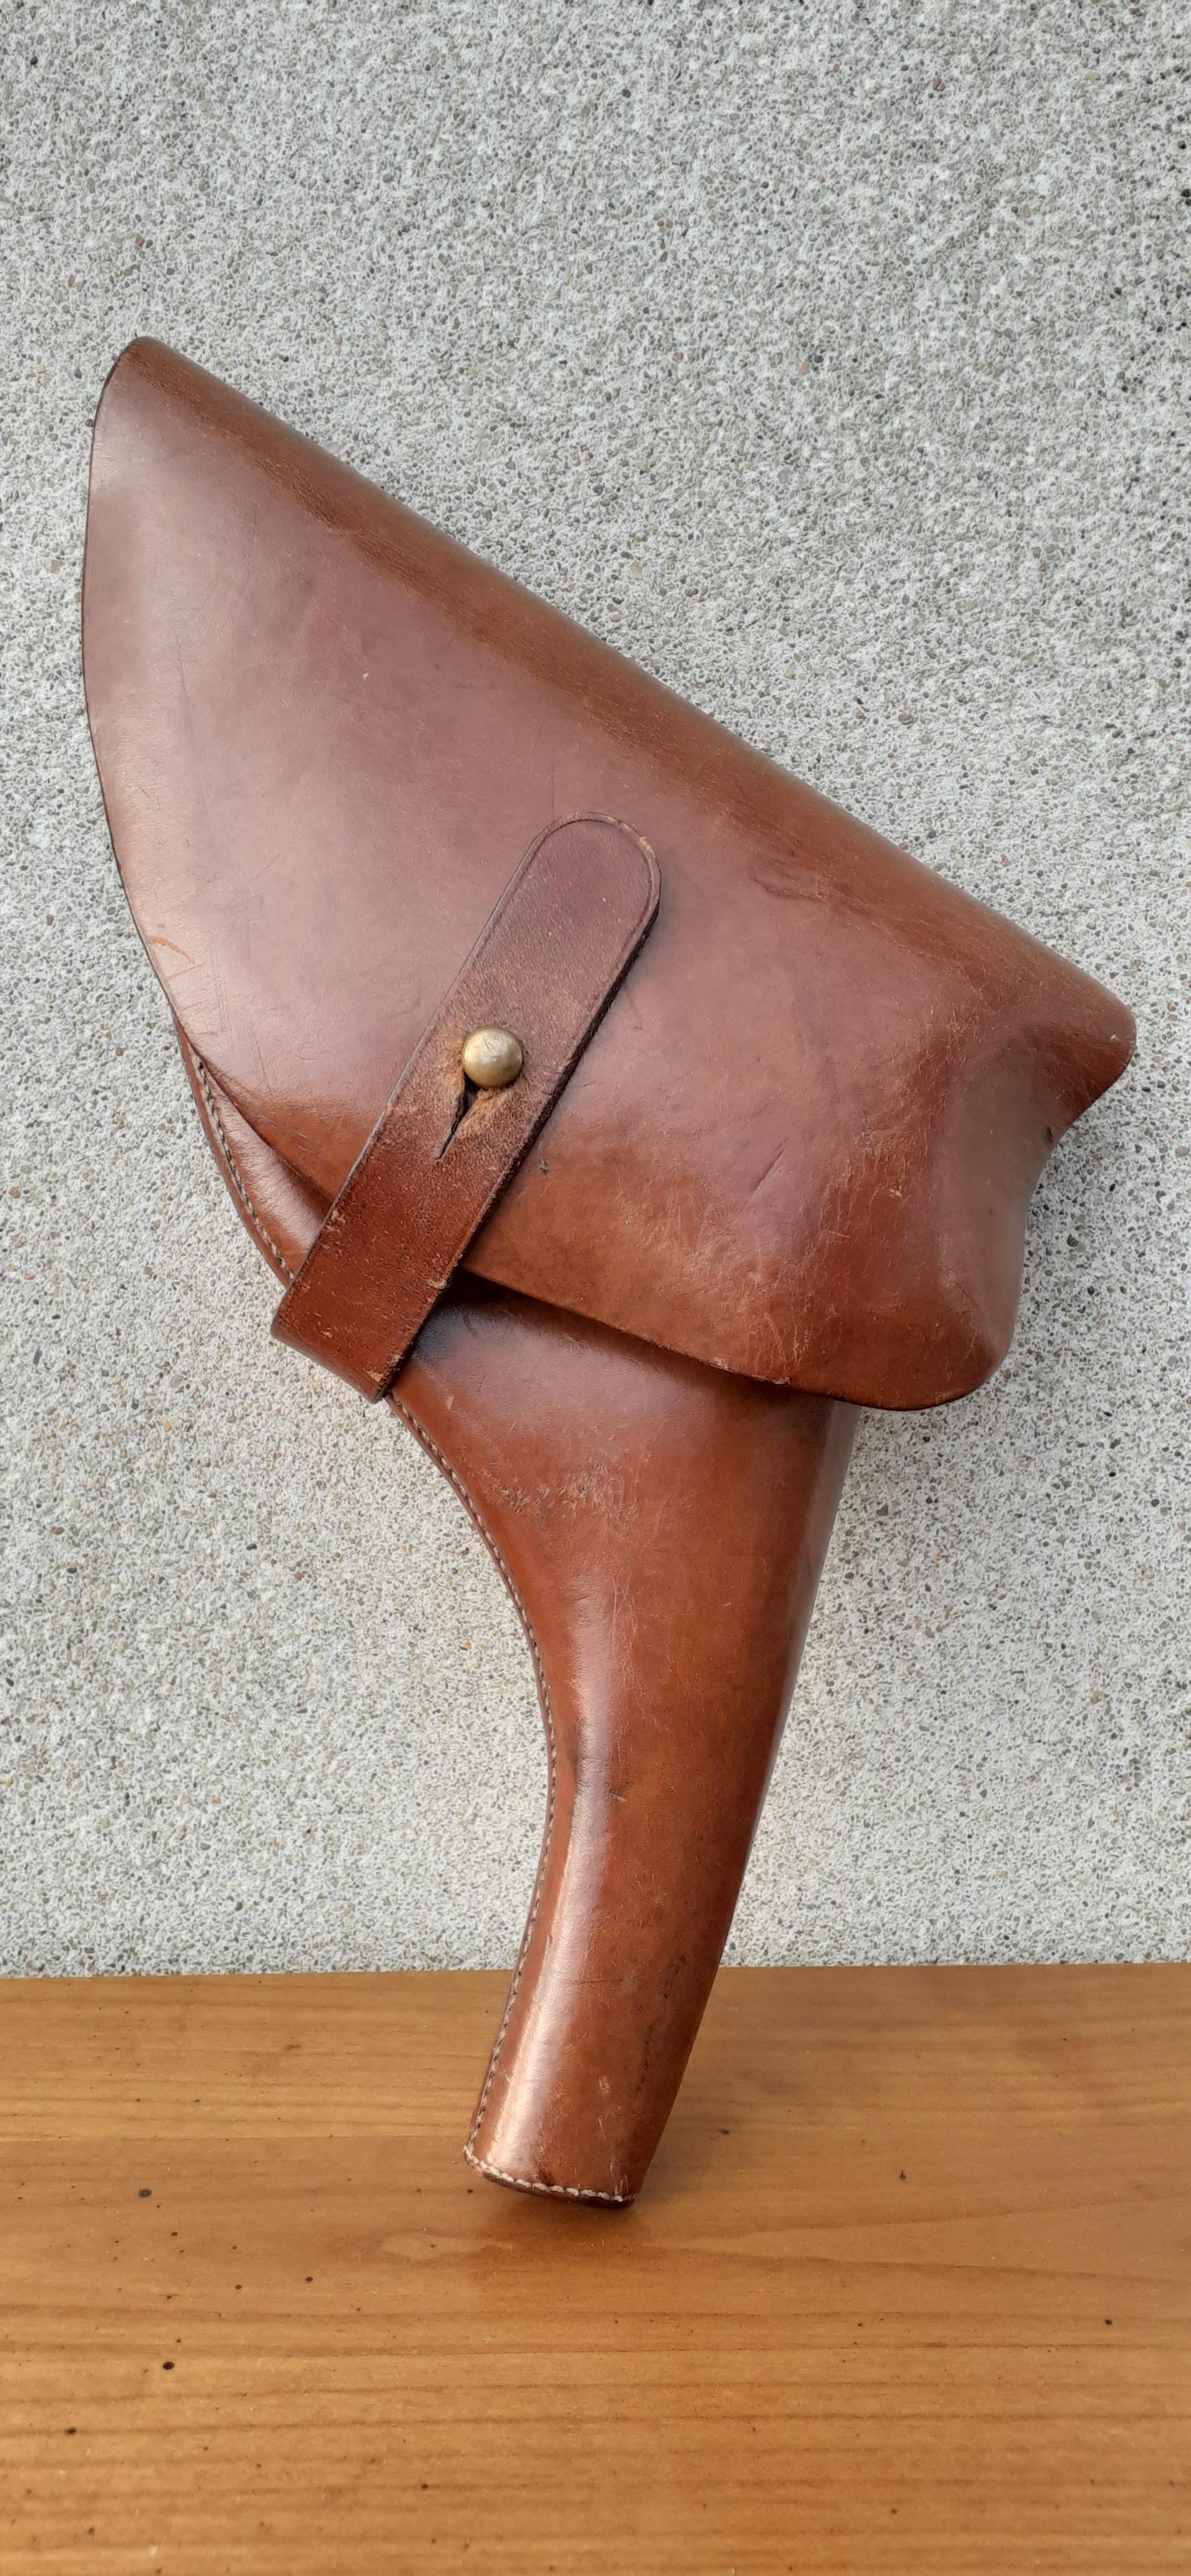 Extremely Rare Authentic Hermès Revolver Holster

Made in France

Vintage Item

Made of extremely strong thick smooth leather, HIGH QUALITY !

Colorway: Fauve (Camel / Brown)

1 pocket for bullets with snap button

The case closes with a golden